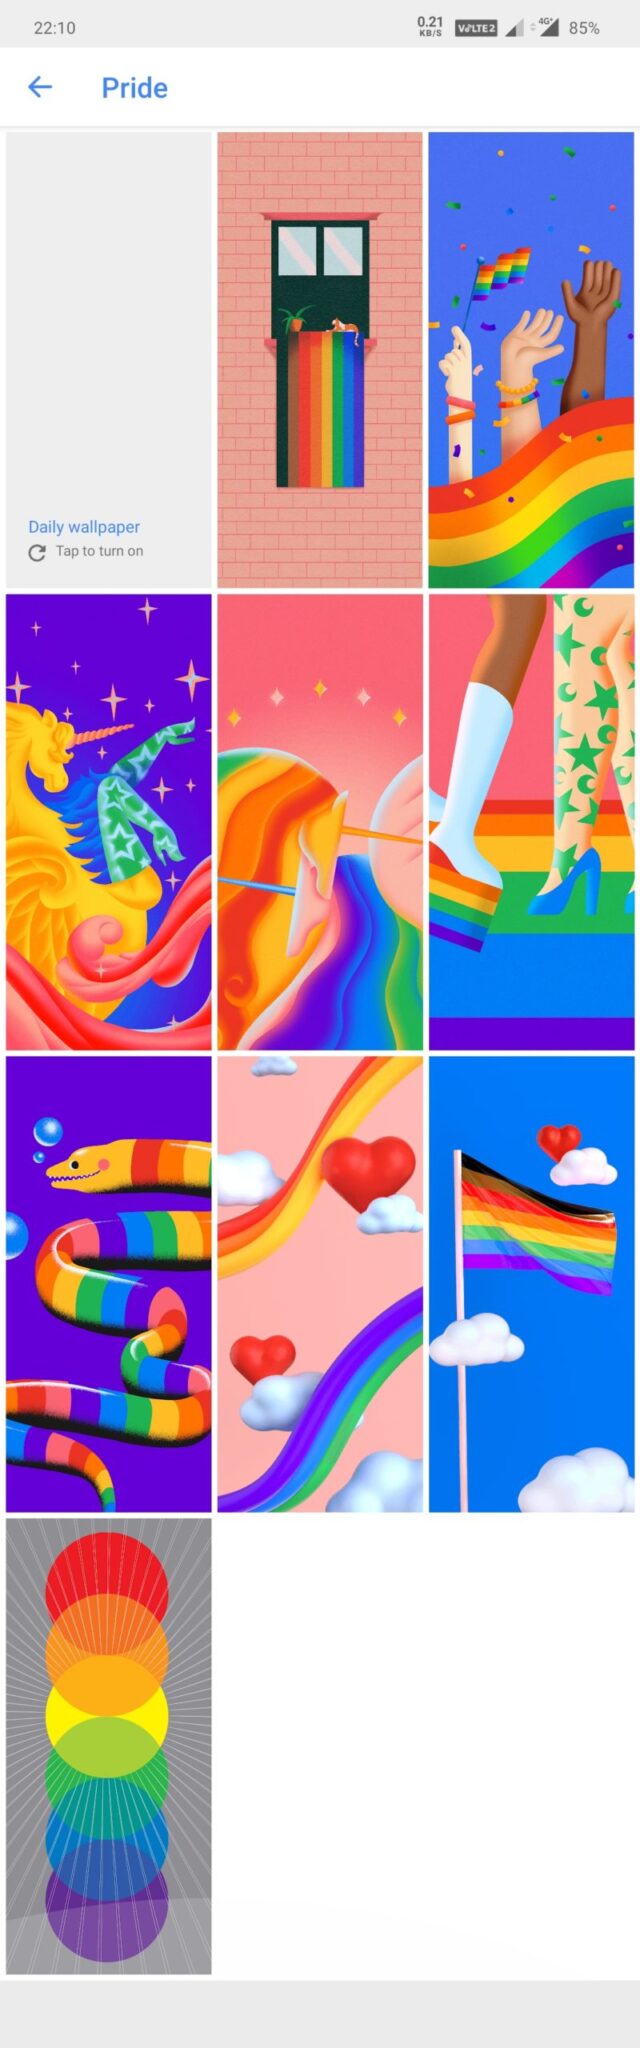 Google Pride wallpapers for Androids are free to use and available now to download from Google Play Store. 